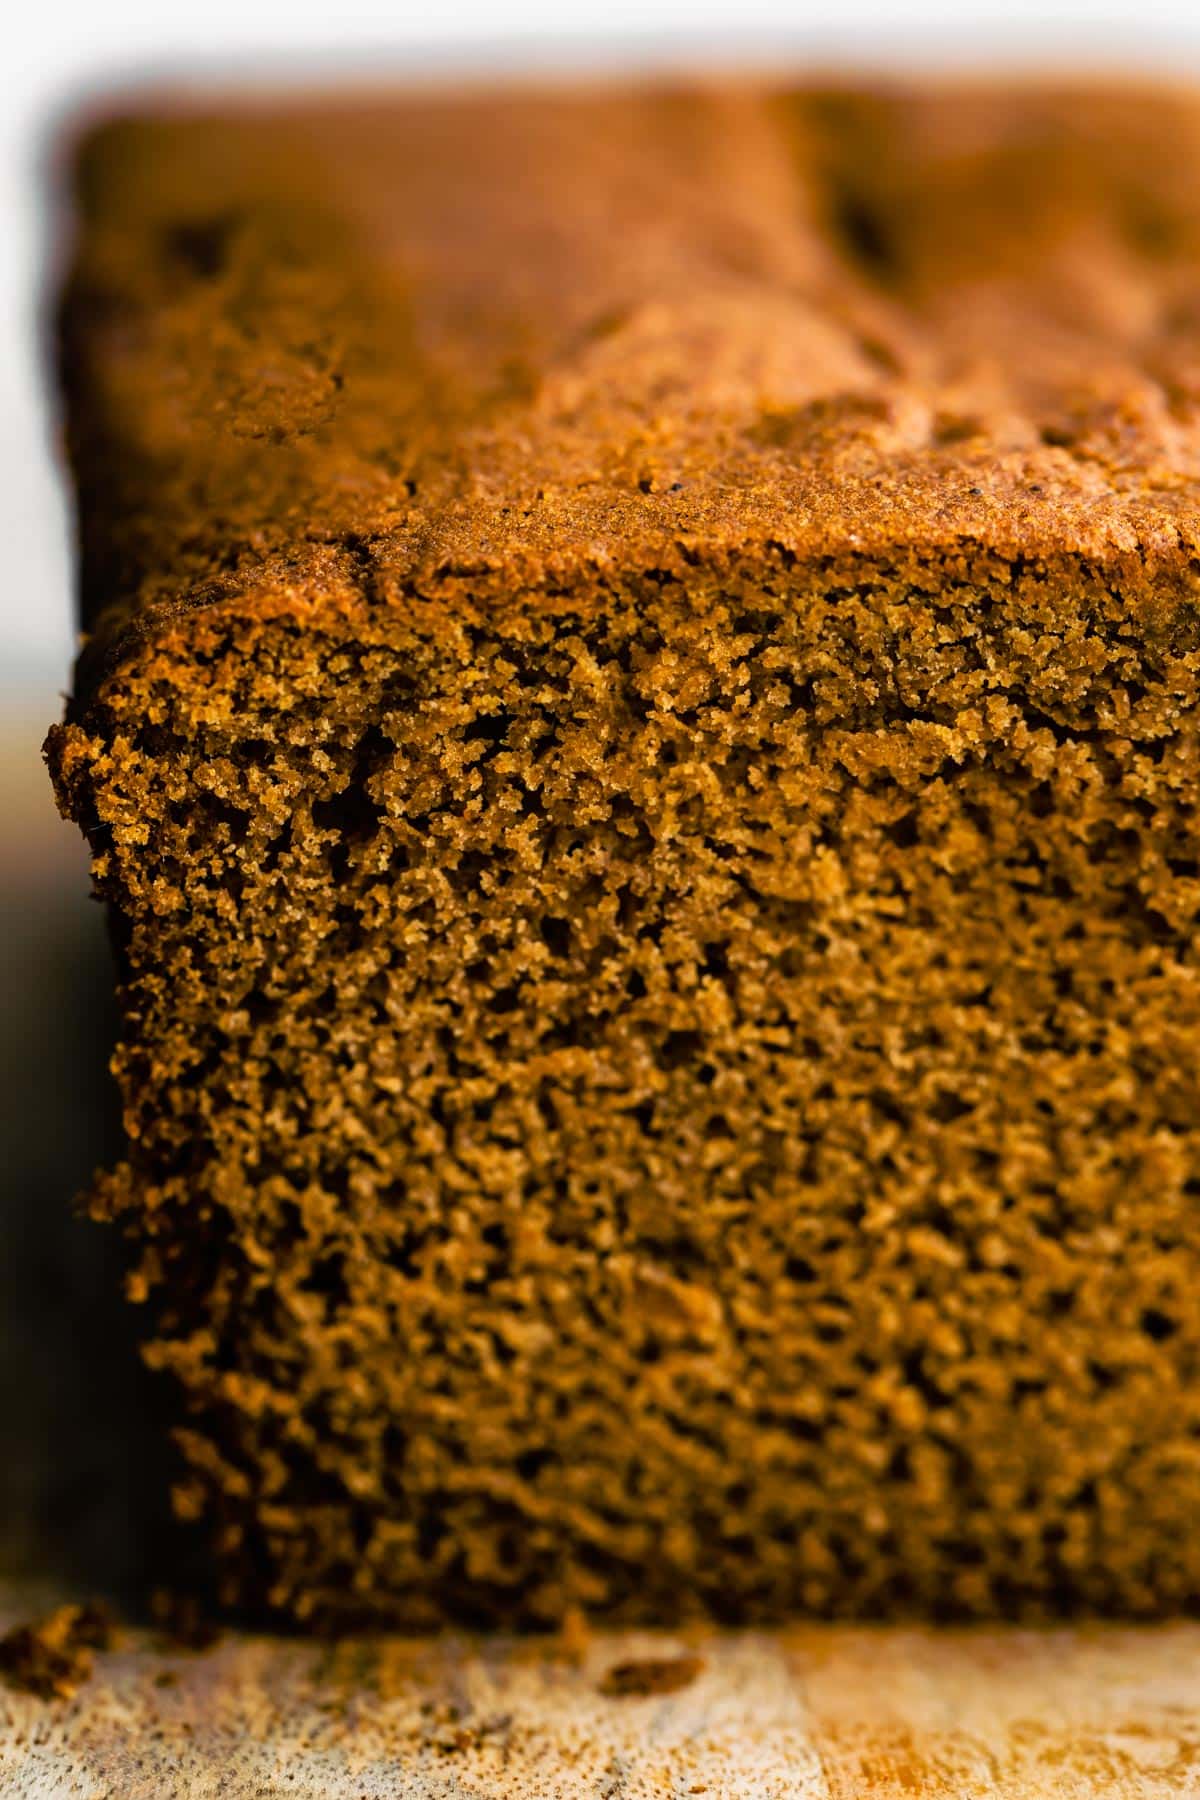 Up close photo of the crumb of a gluten free gingerbread loaf.